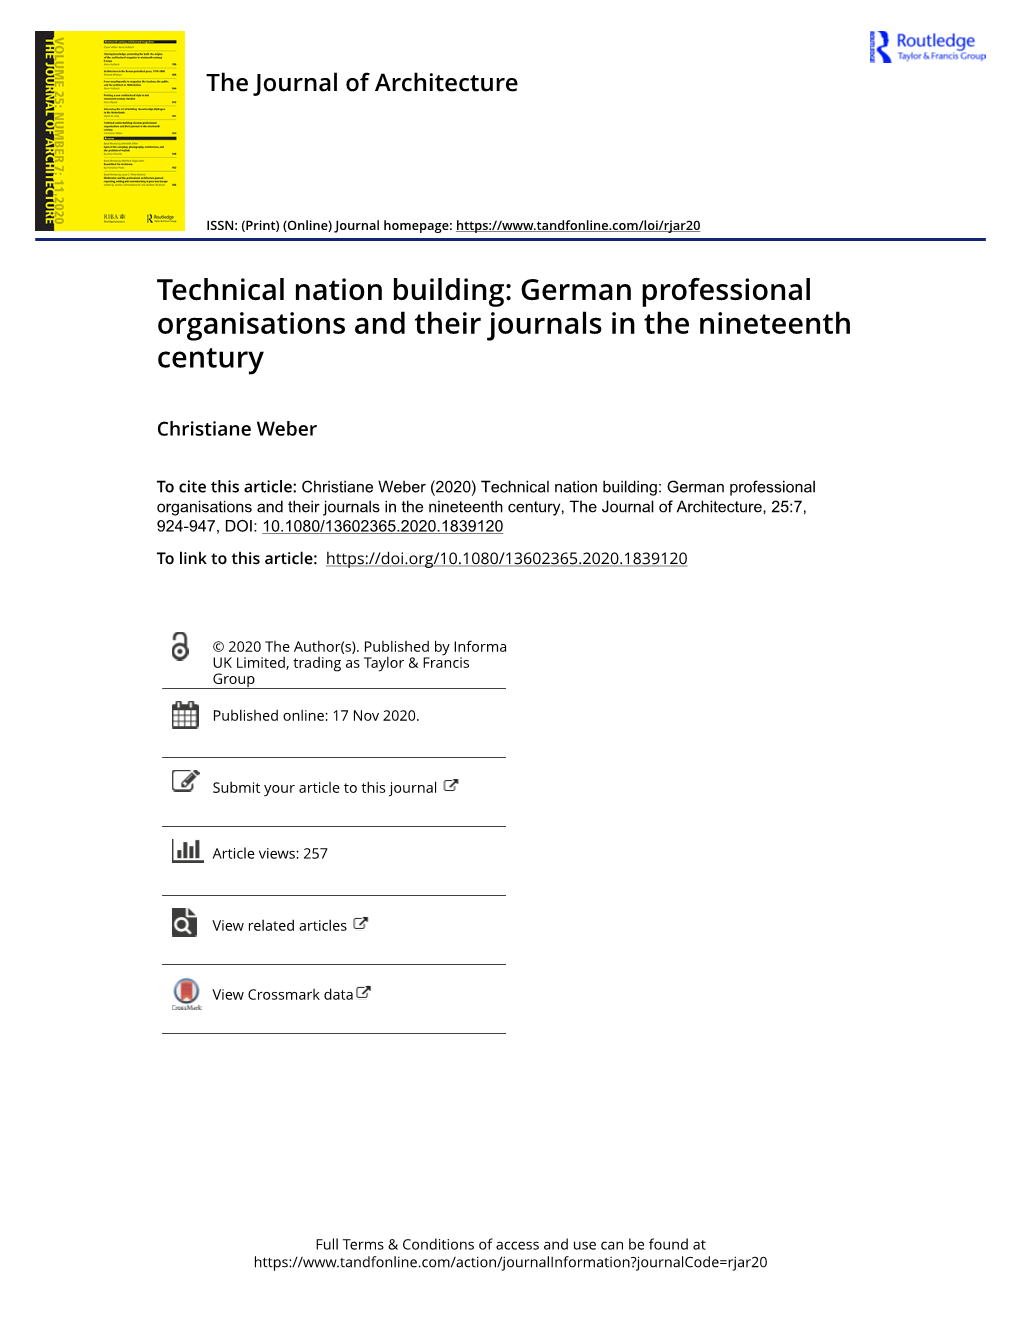 Technical Nation Building: German Professional Organisations and Their Journals in the Nineteenth Century